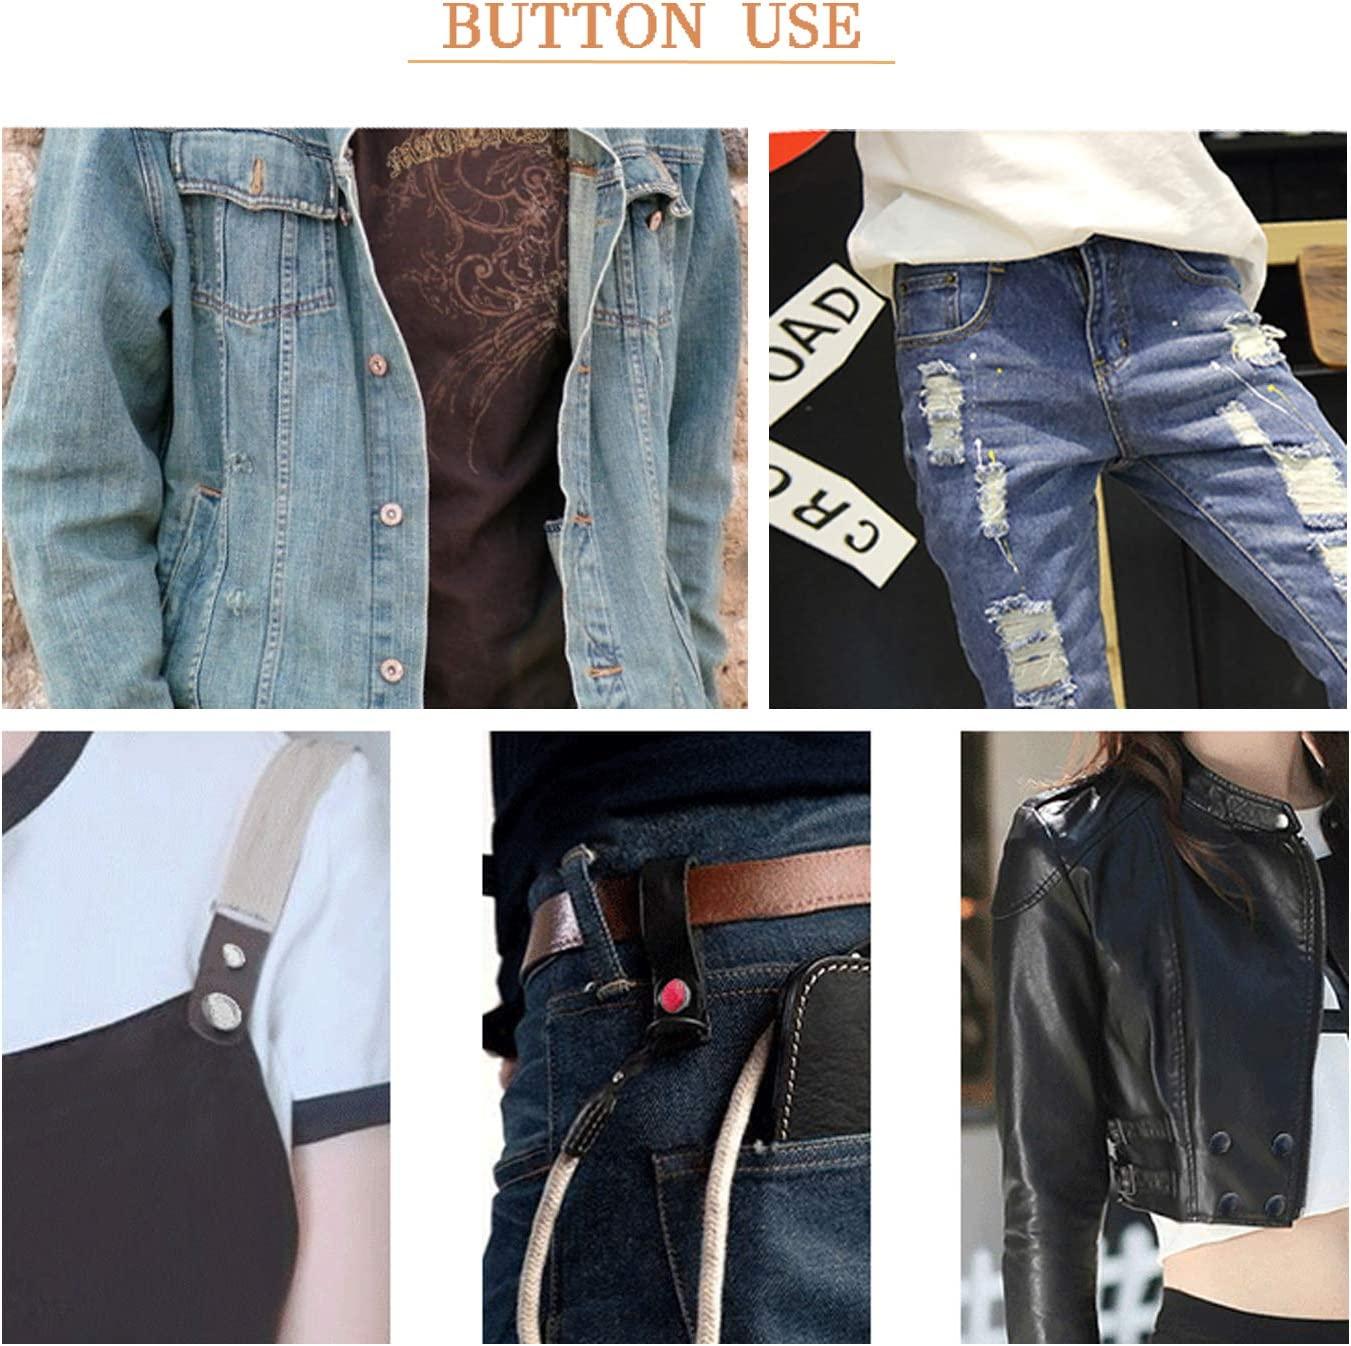 6PCS Perfect Fit Instant Button, Instant Buttons, Jean Replacement Buttons  Removable Button No Sew Buttons to Extend or Reduce an Inch to Any Pants  Waist in Seconds!